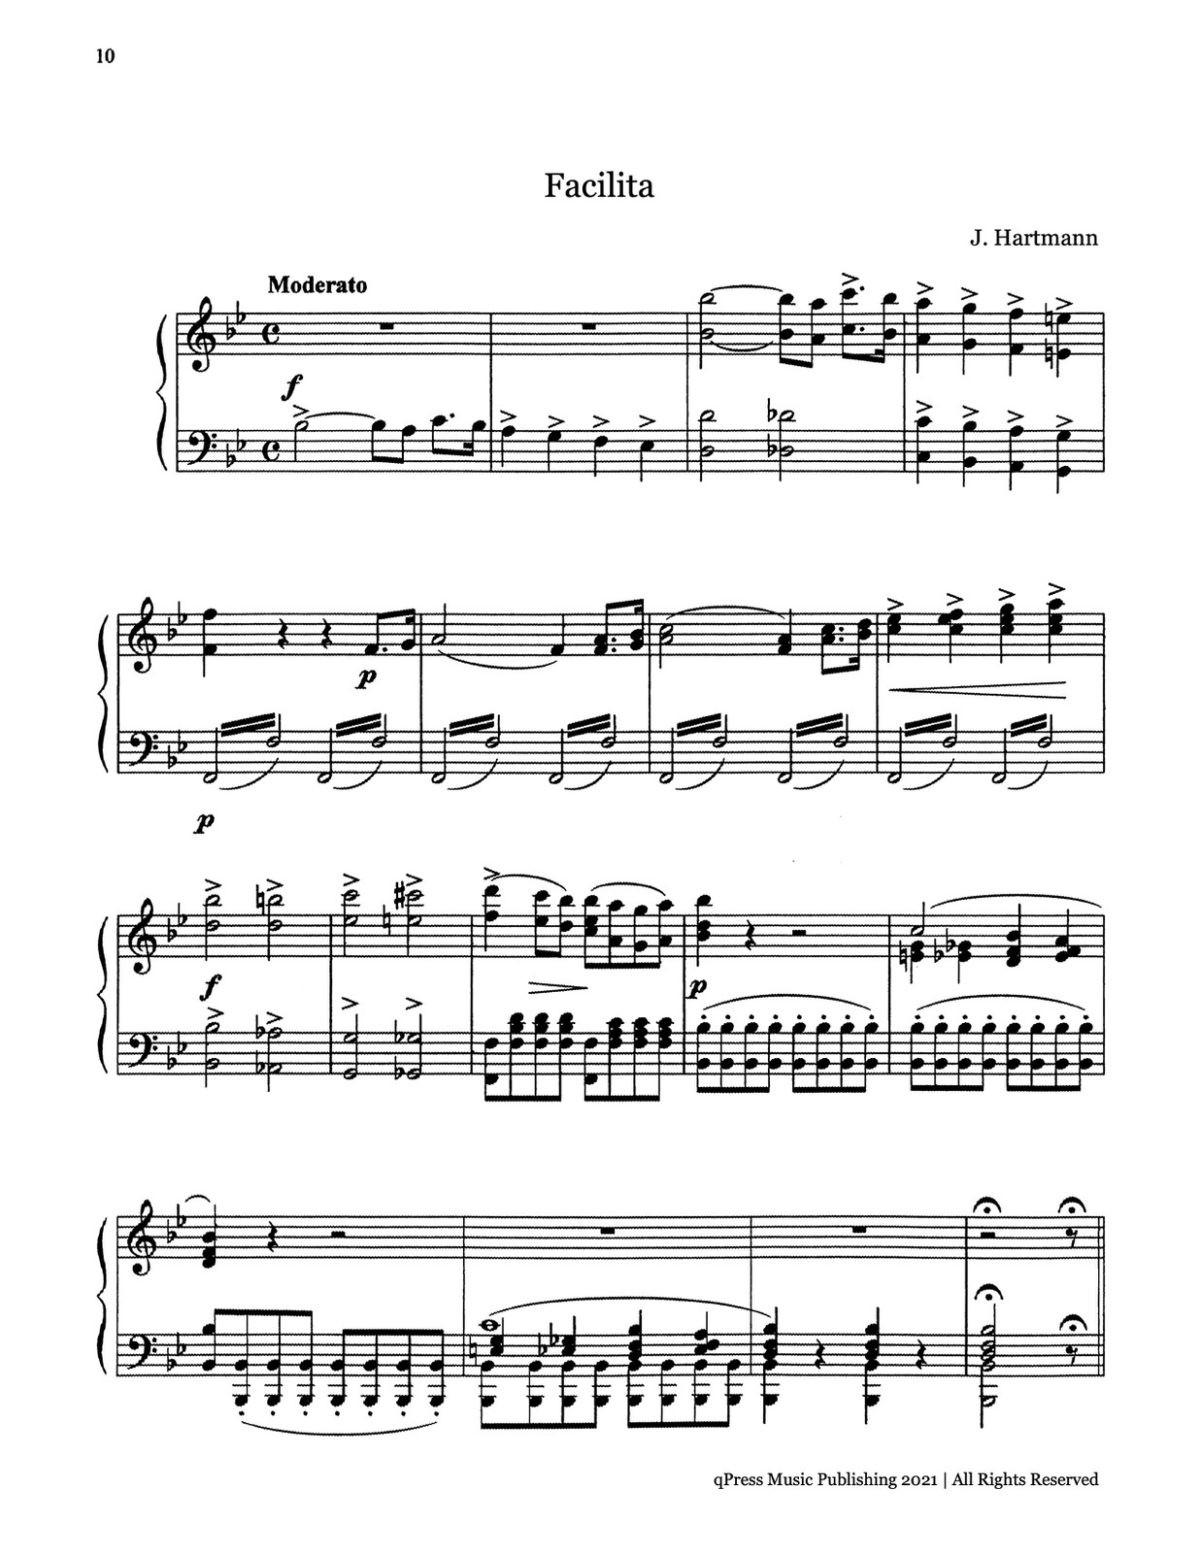 Gogol – Chilly Gonzales Sheet music for Piano (Solo)